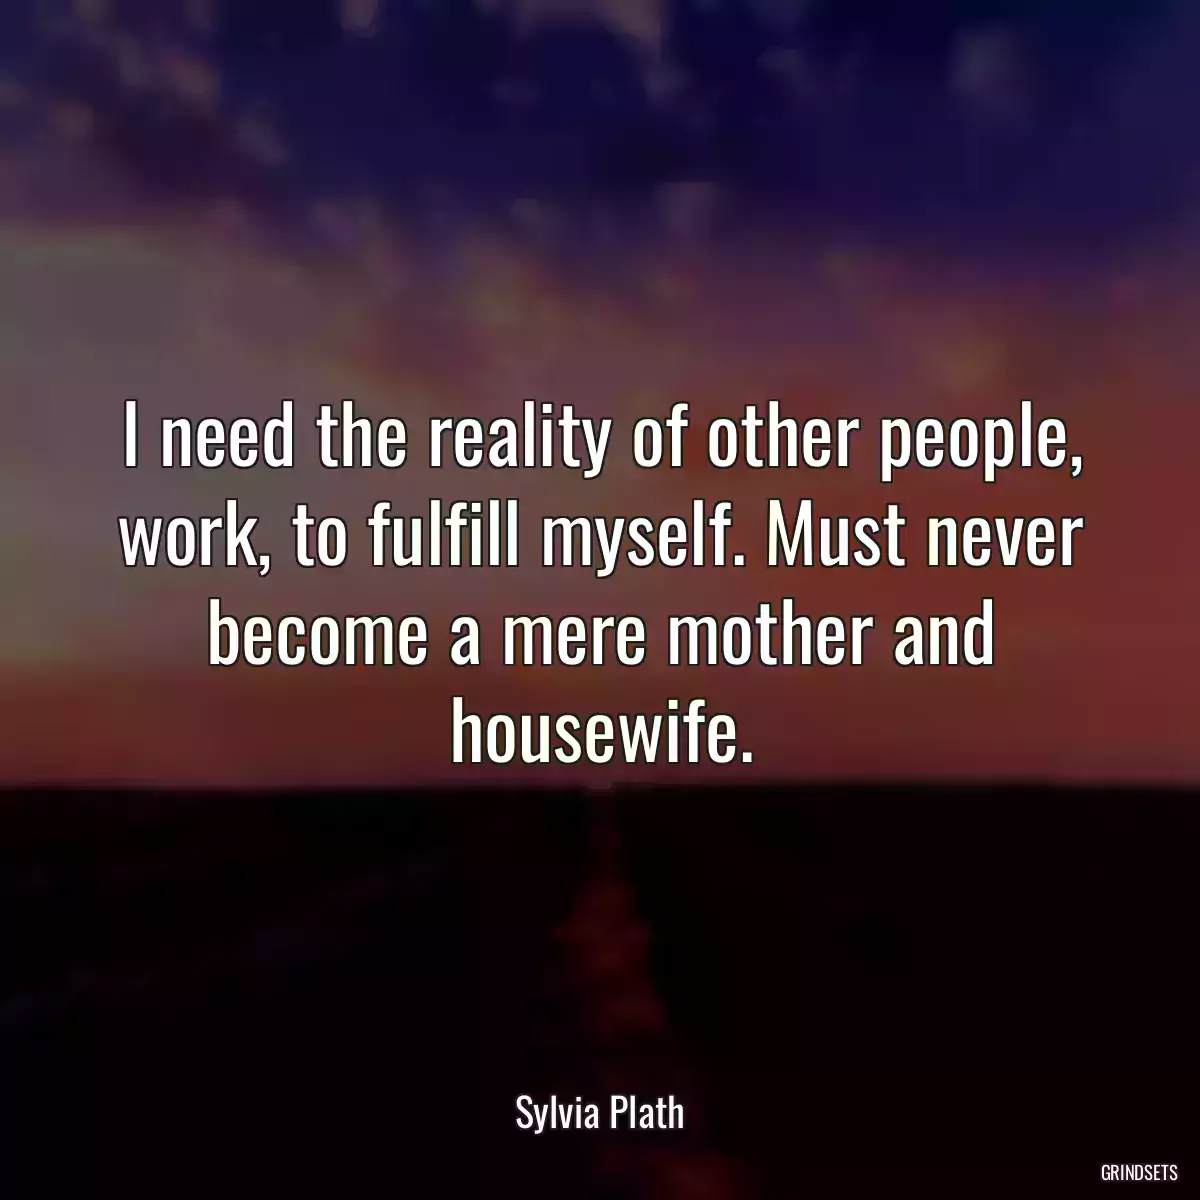 I need the reality of other people, work, to fulfill myself. Must never become a mere mother and housewife.